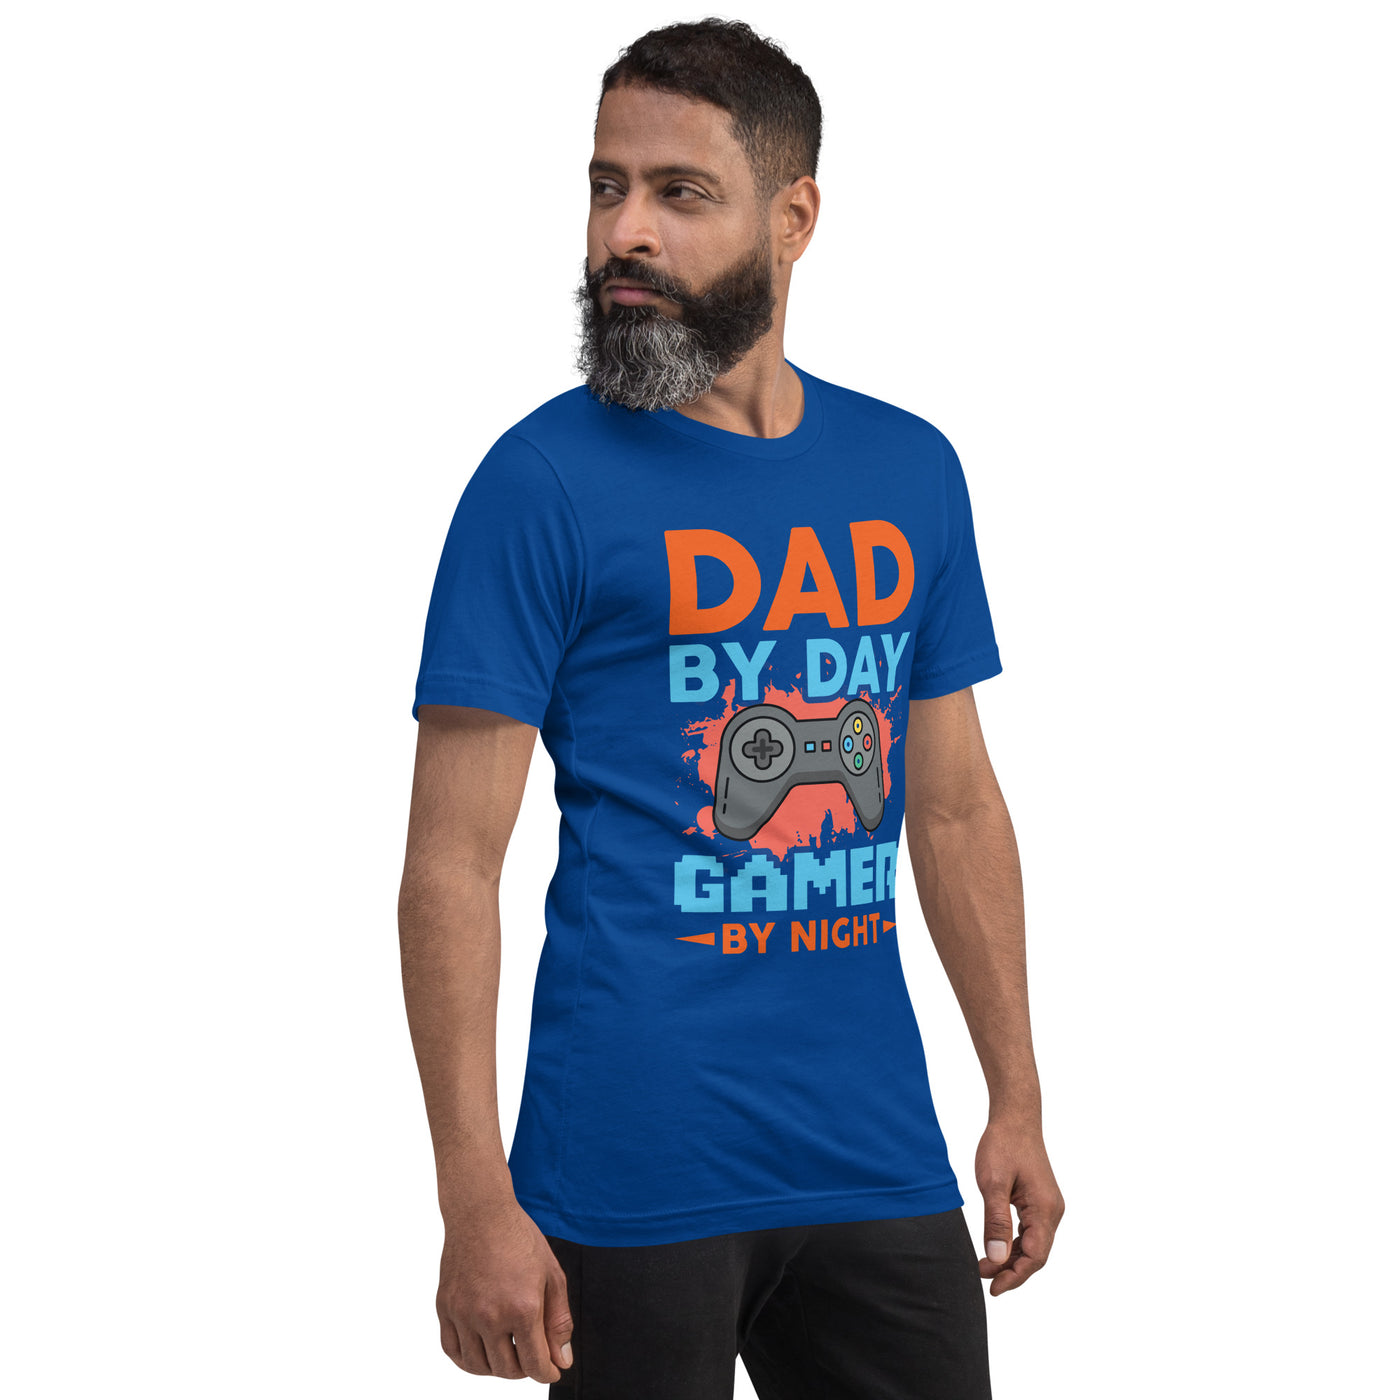 Dad by Day, Gamer by Night - Unisex t-shirt